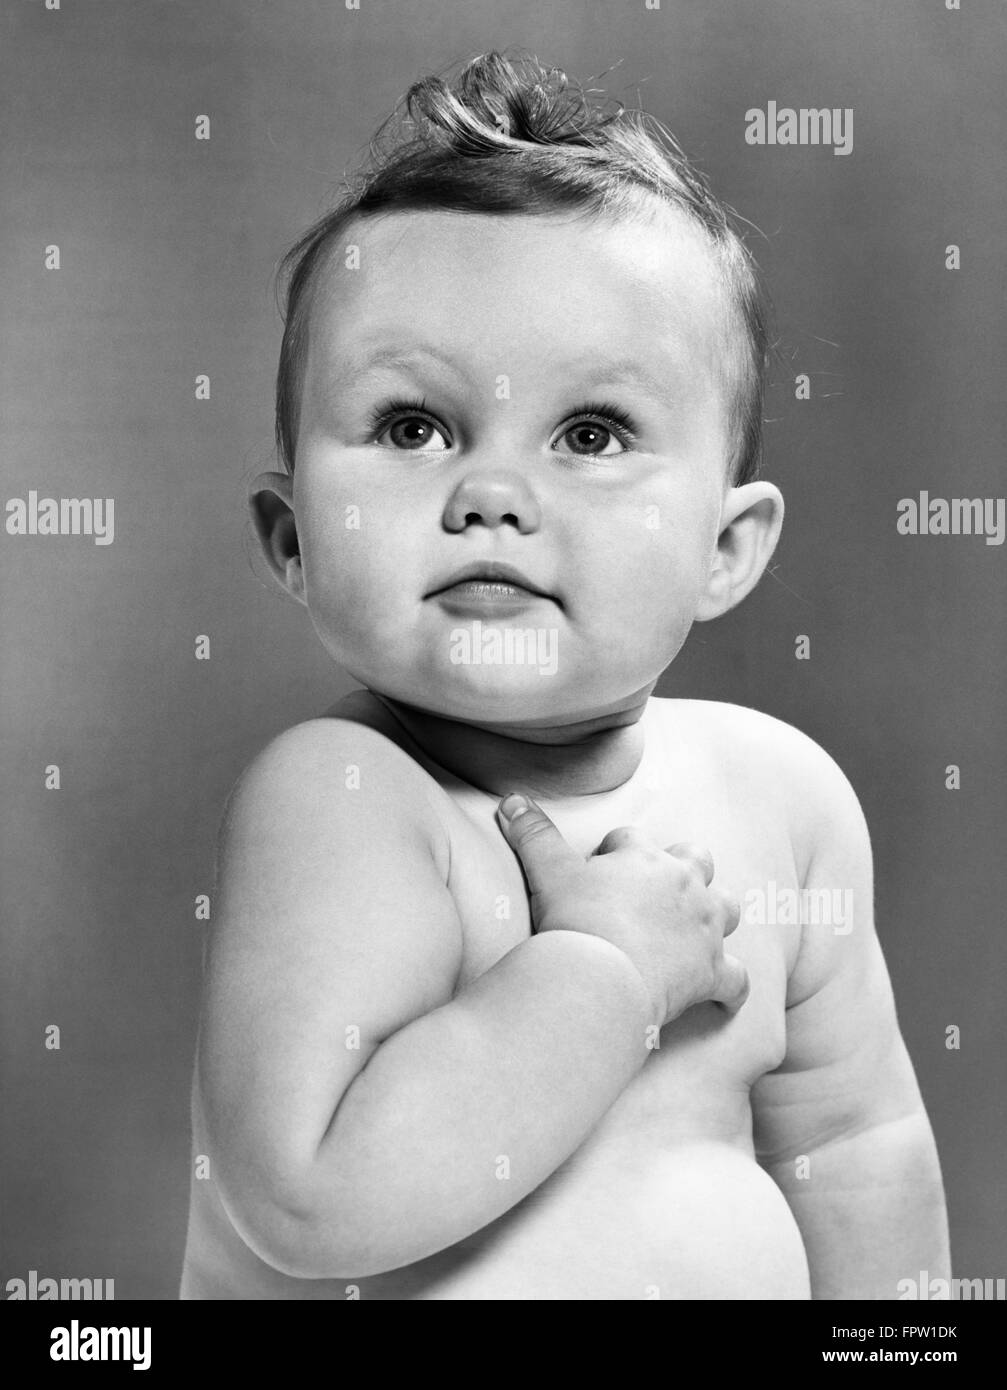 1950s BABY LOOKING UP HOLDING RIGHT HAND OVER HEART PLEDGE Stock Photo